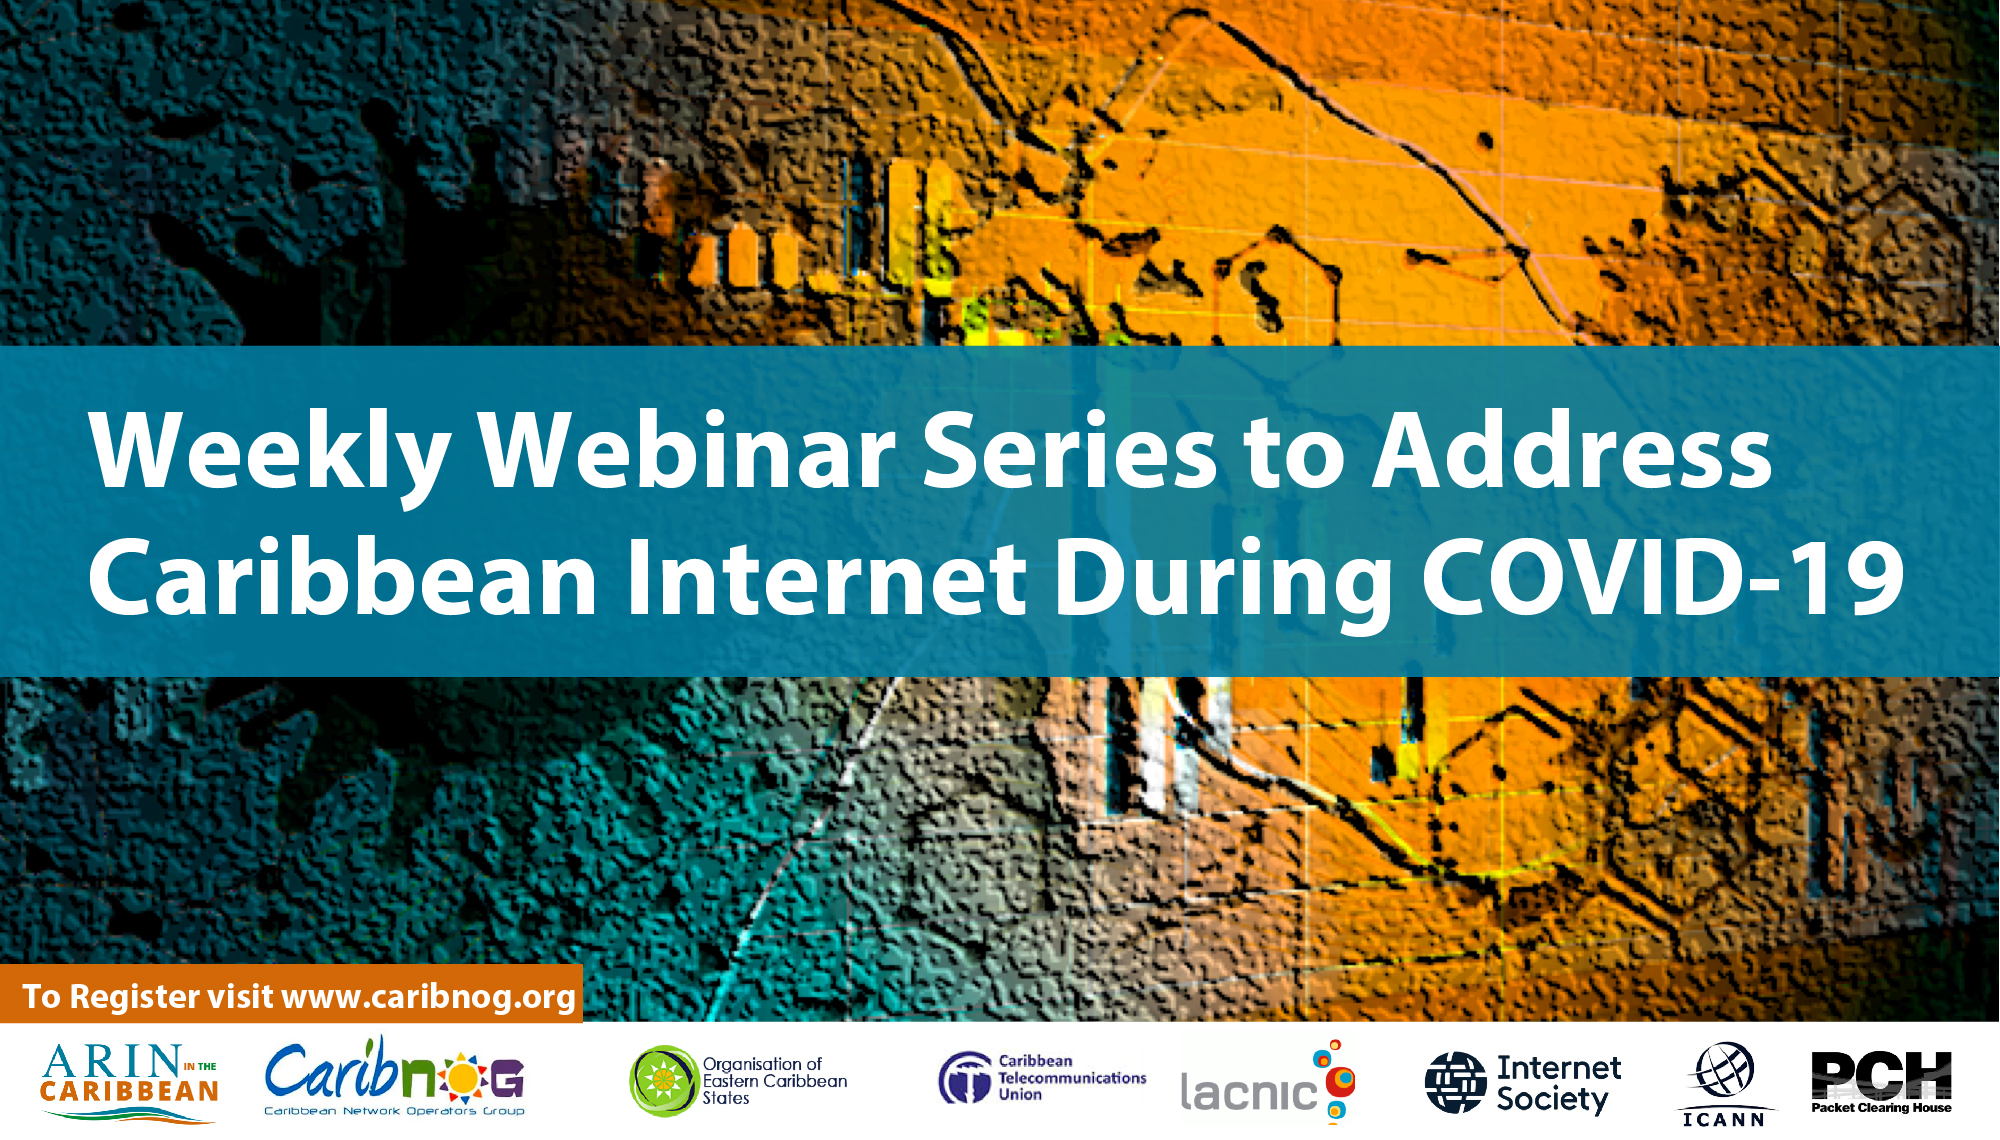 Weekly Webinar Series to Address Caribbean Internet During COVID-19